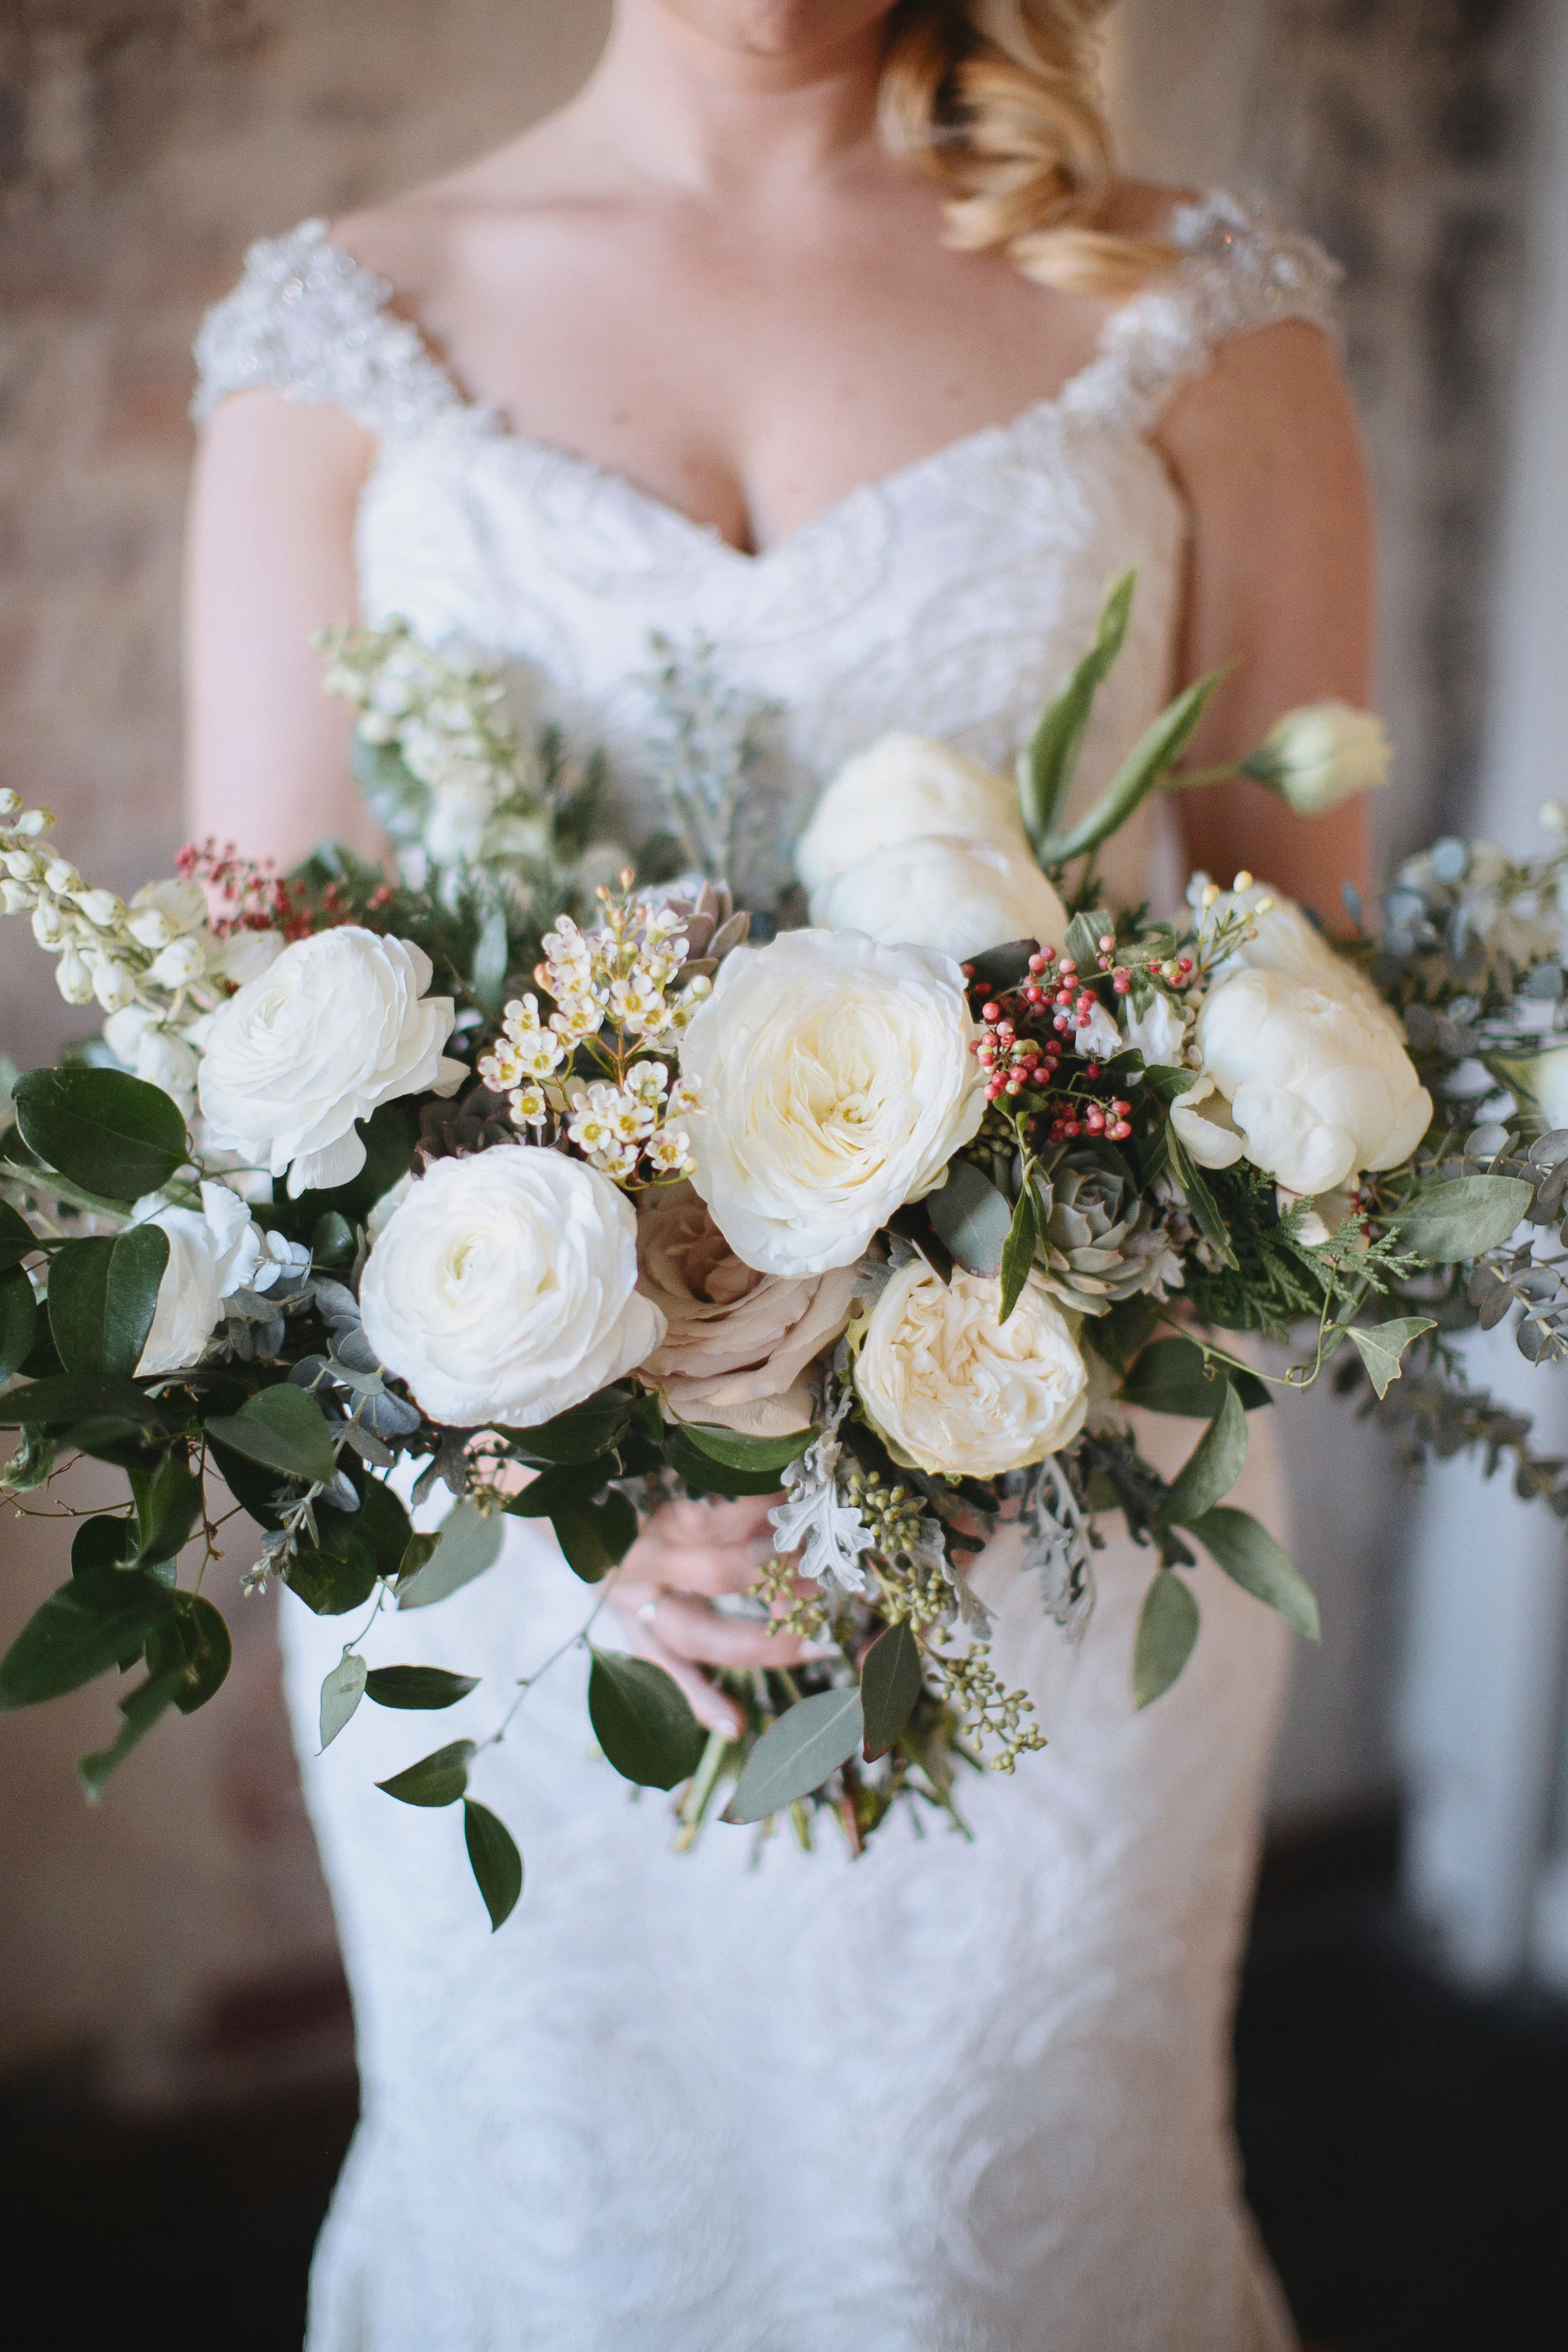 Wintry bridal bouquet with all white flowers, natural greenery, and touches of red berries // Nashville Wedding Florist